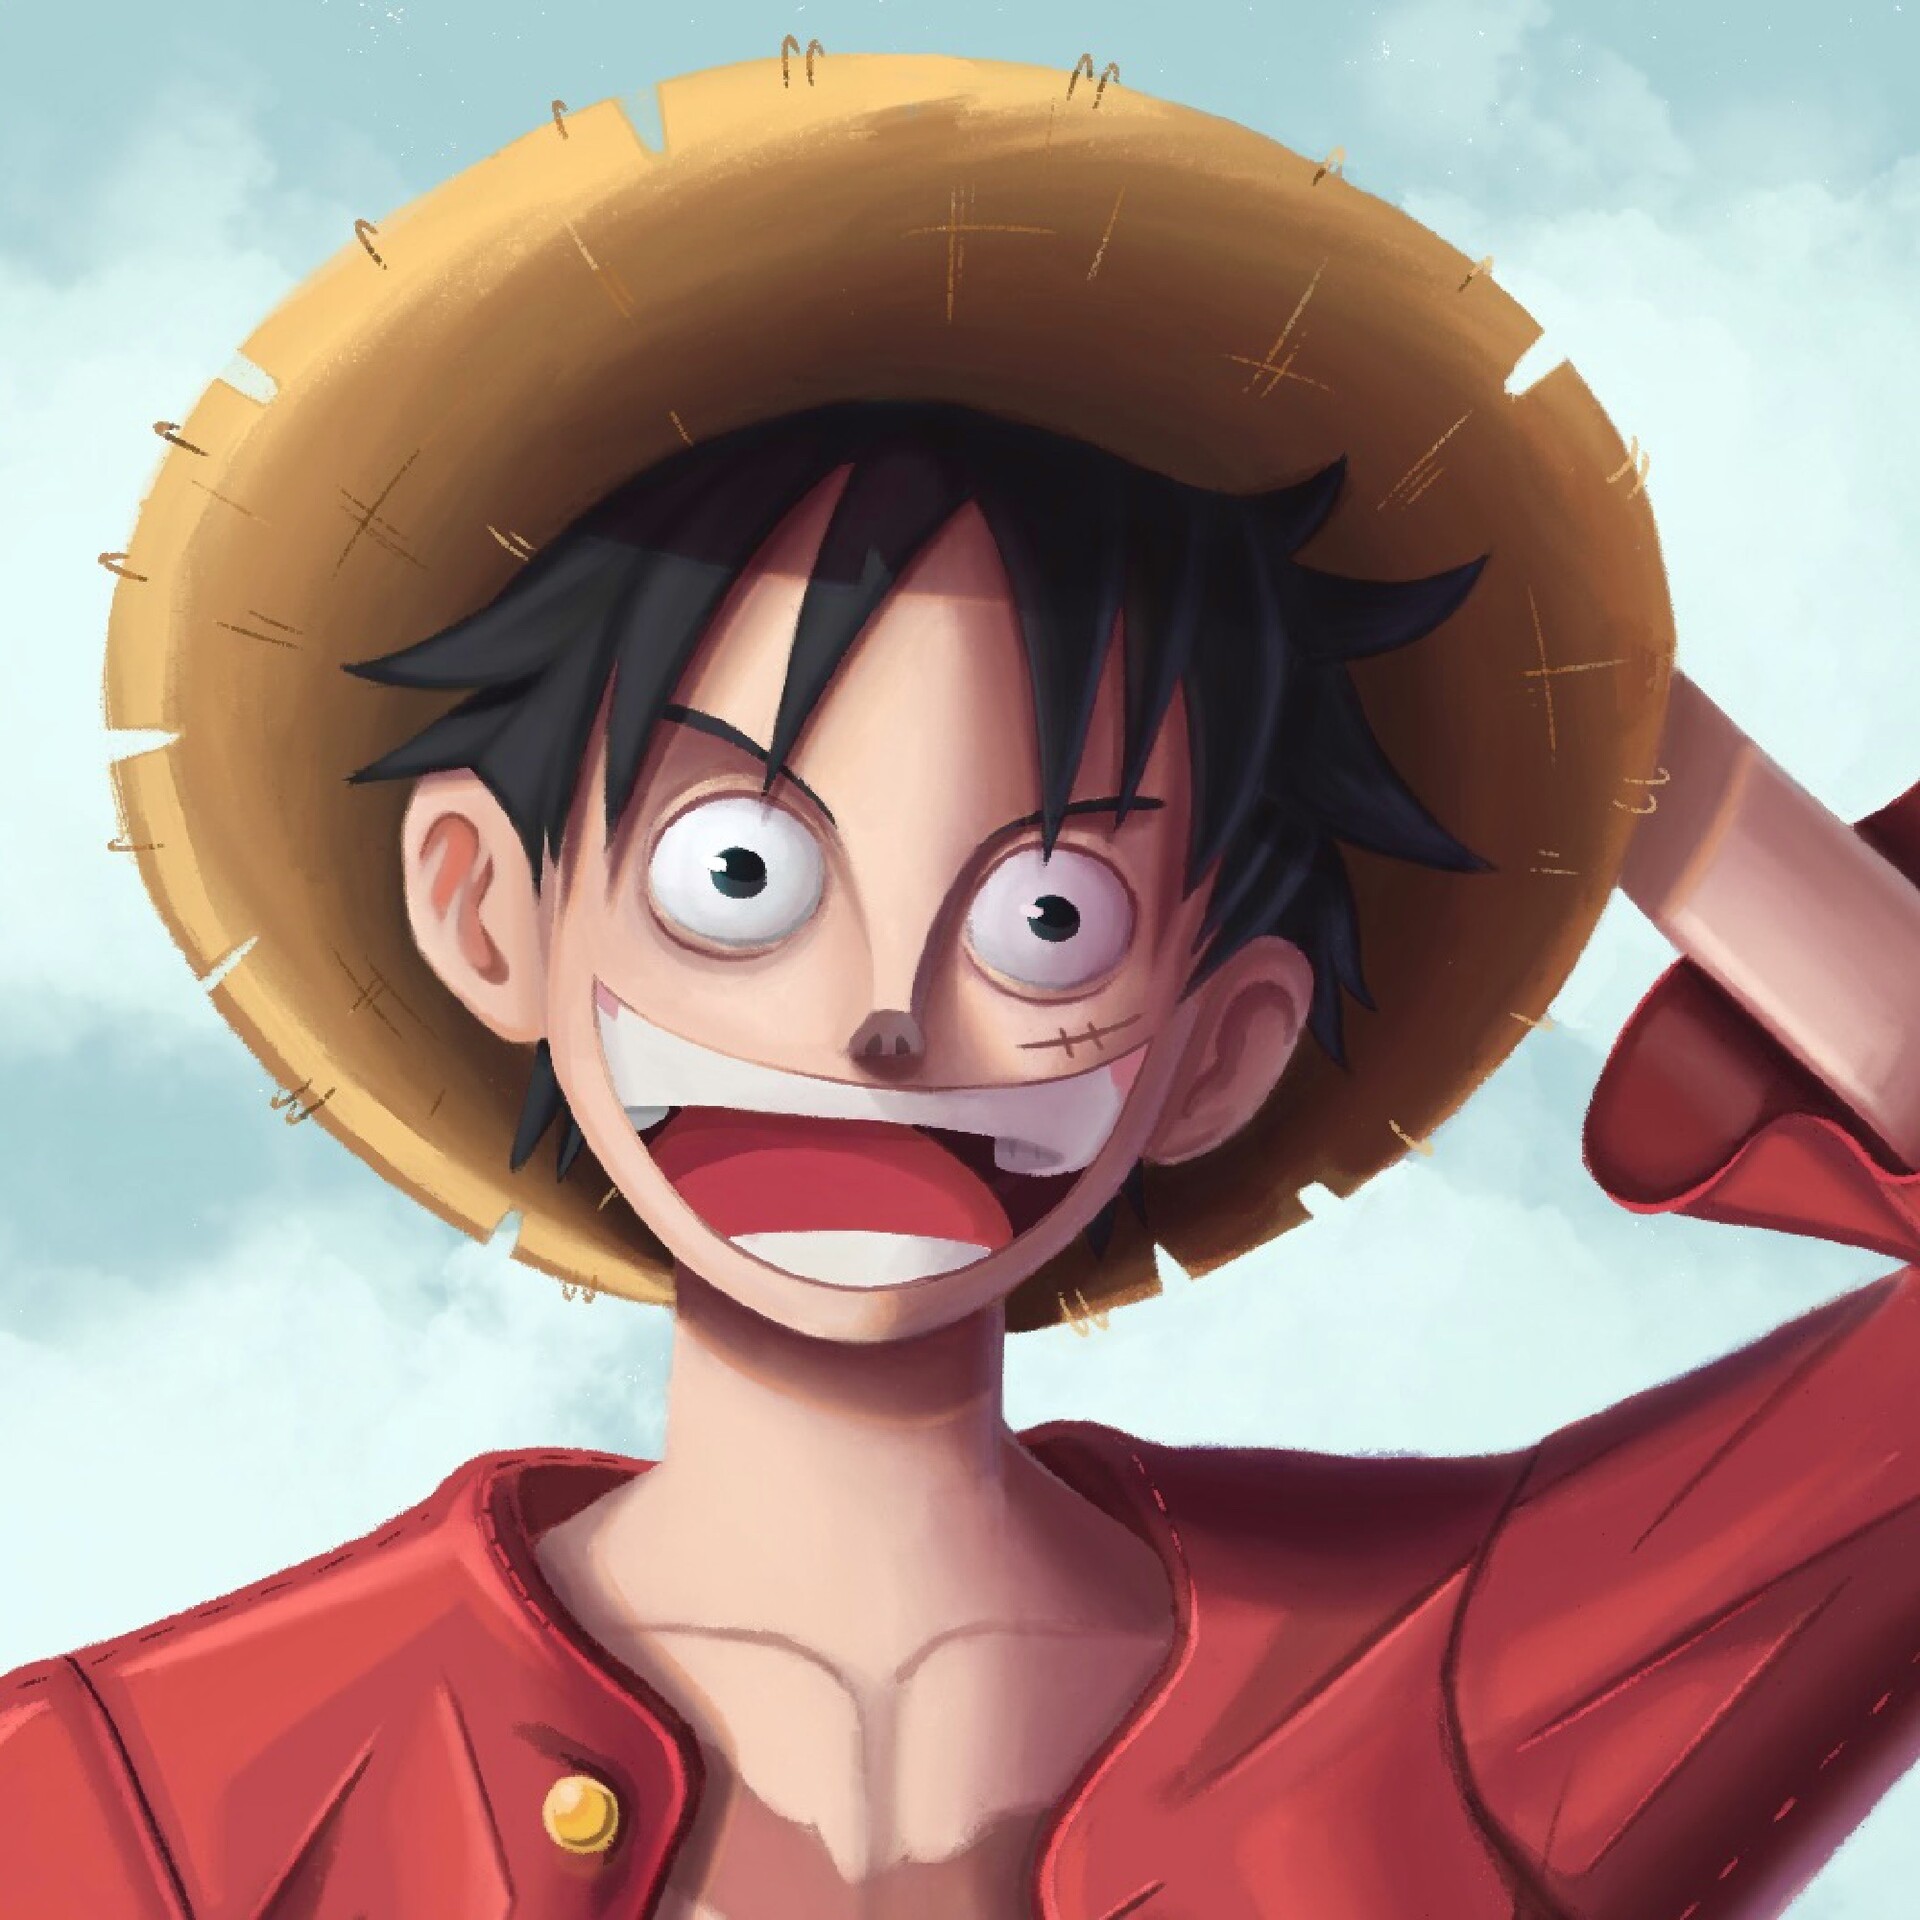 ArtStation - Luffy from “One Piece”